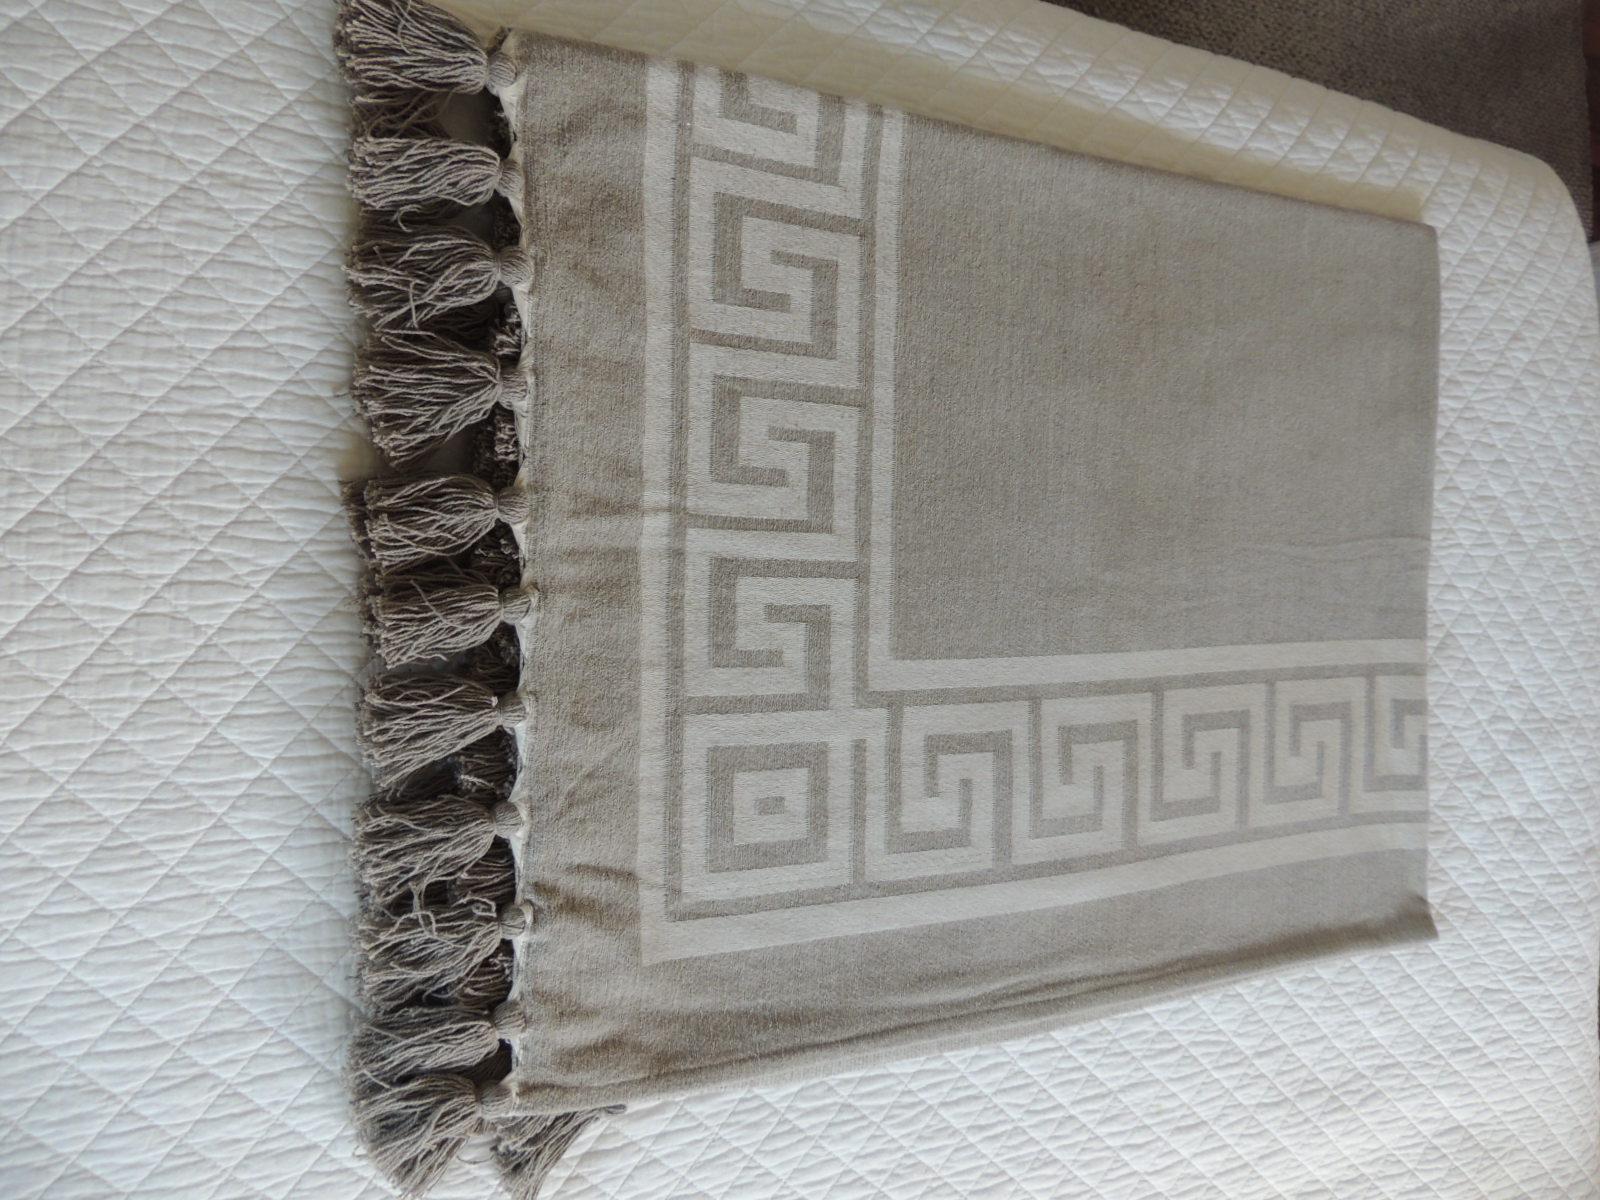 Greek key throw with tassels.
Dusty moss green and white chenille cotton fabric.
Size: 49